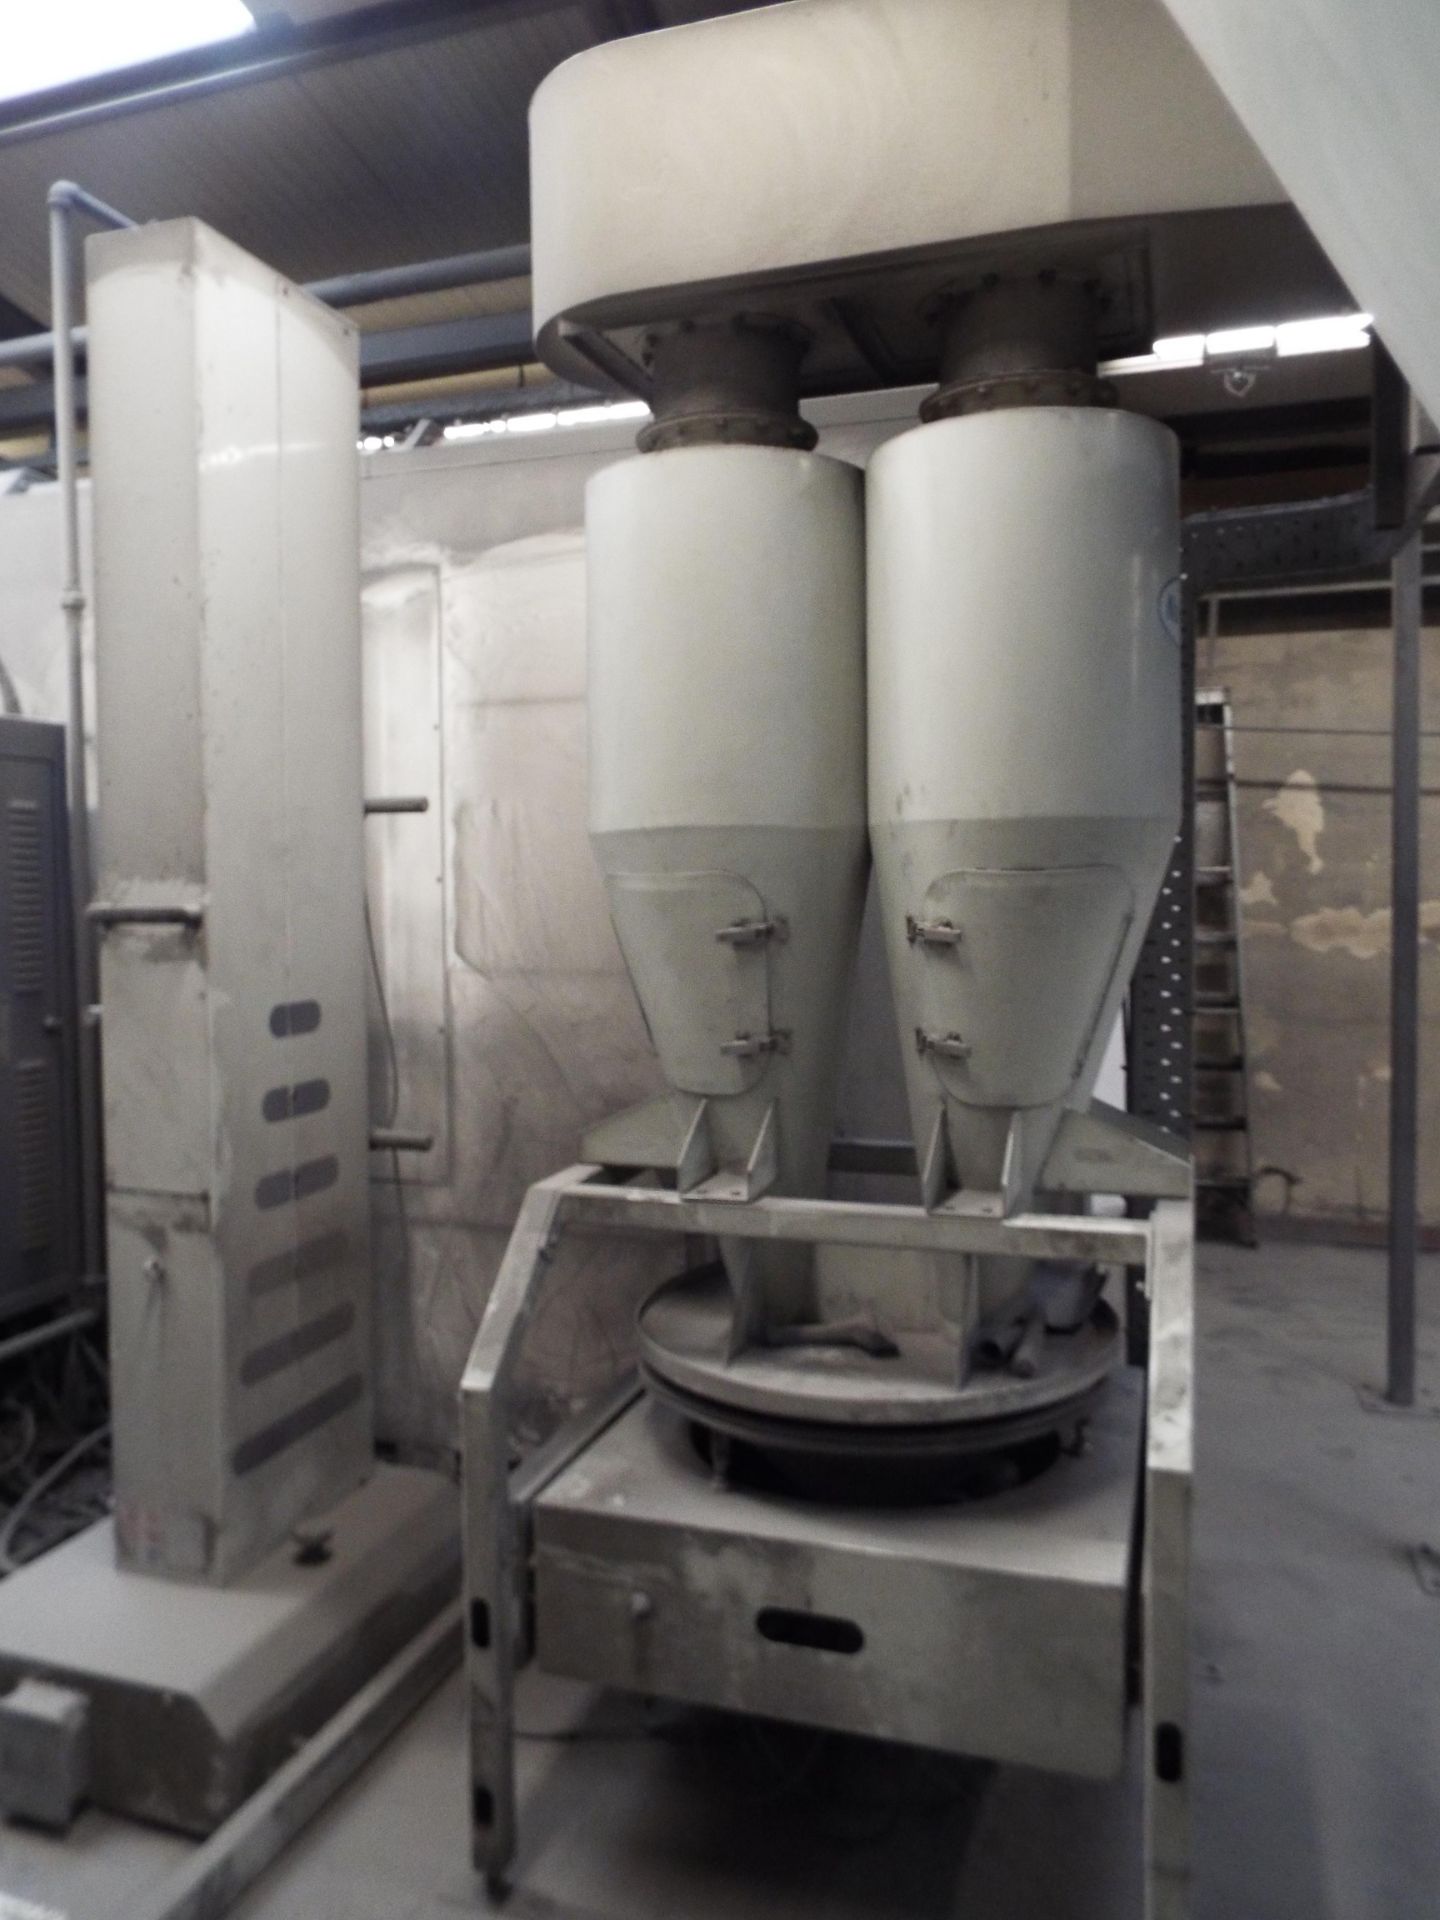 Complete Contents Of A Modern & Compact Nordsen Powder Coating Line cw On-Line Pretreatment. - Image 8 of 21